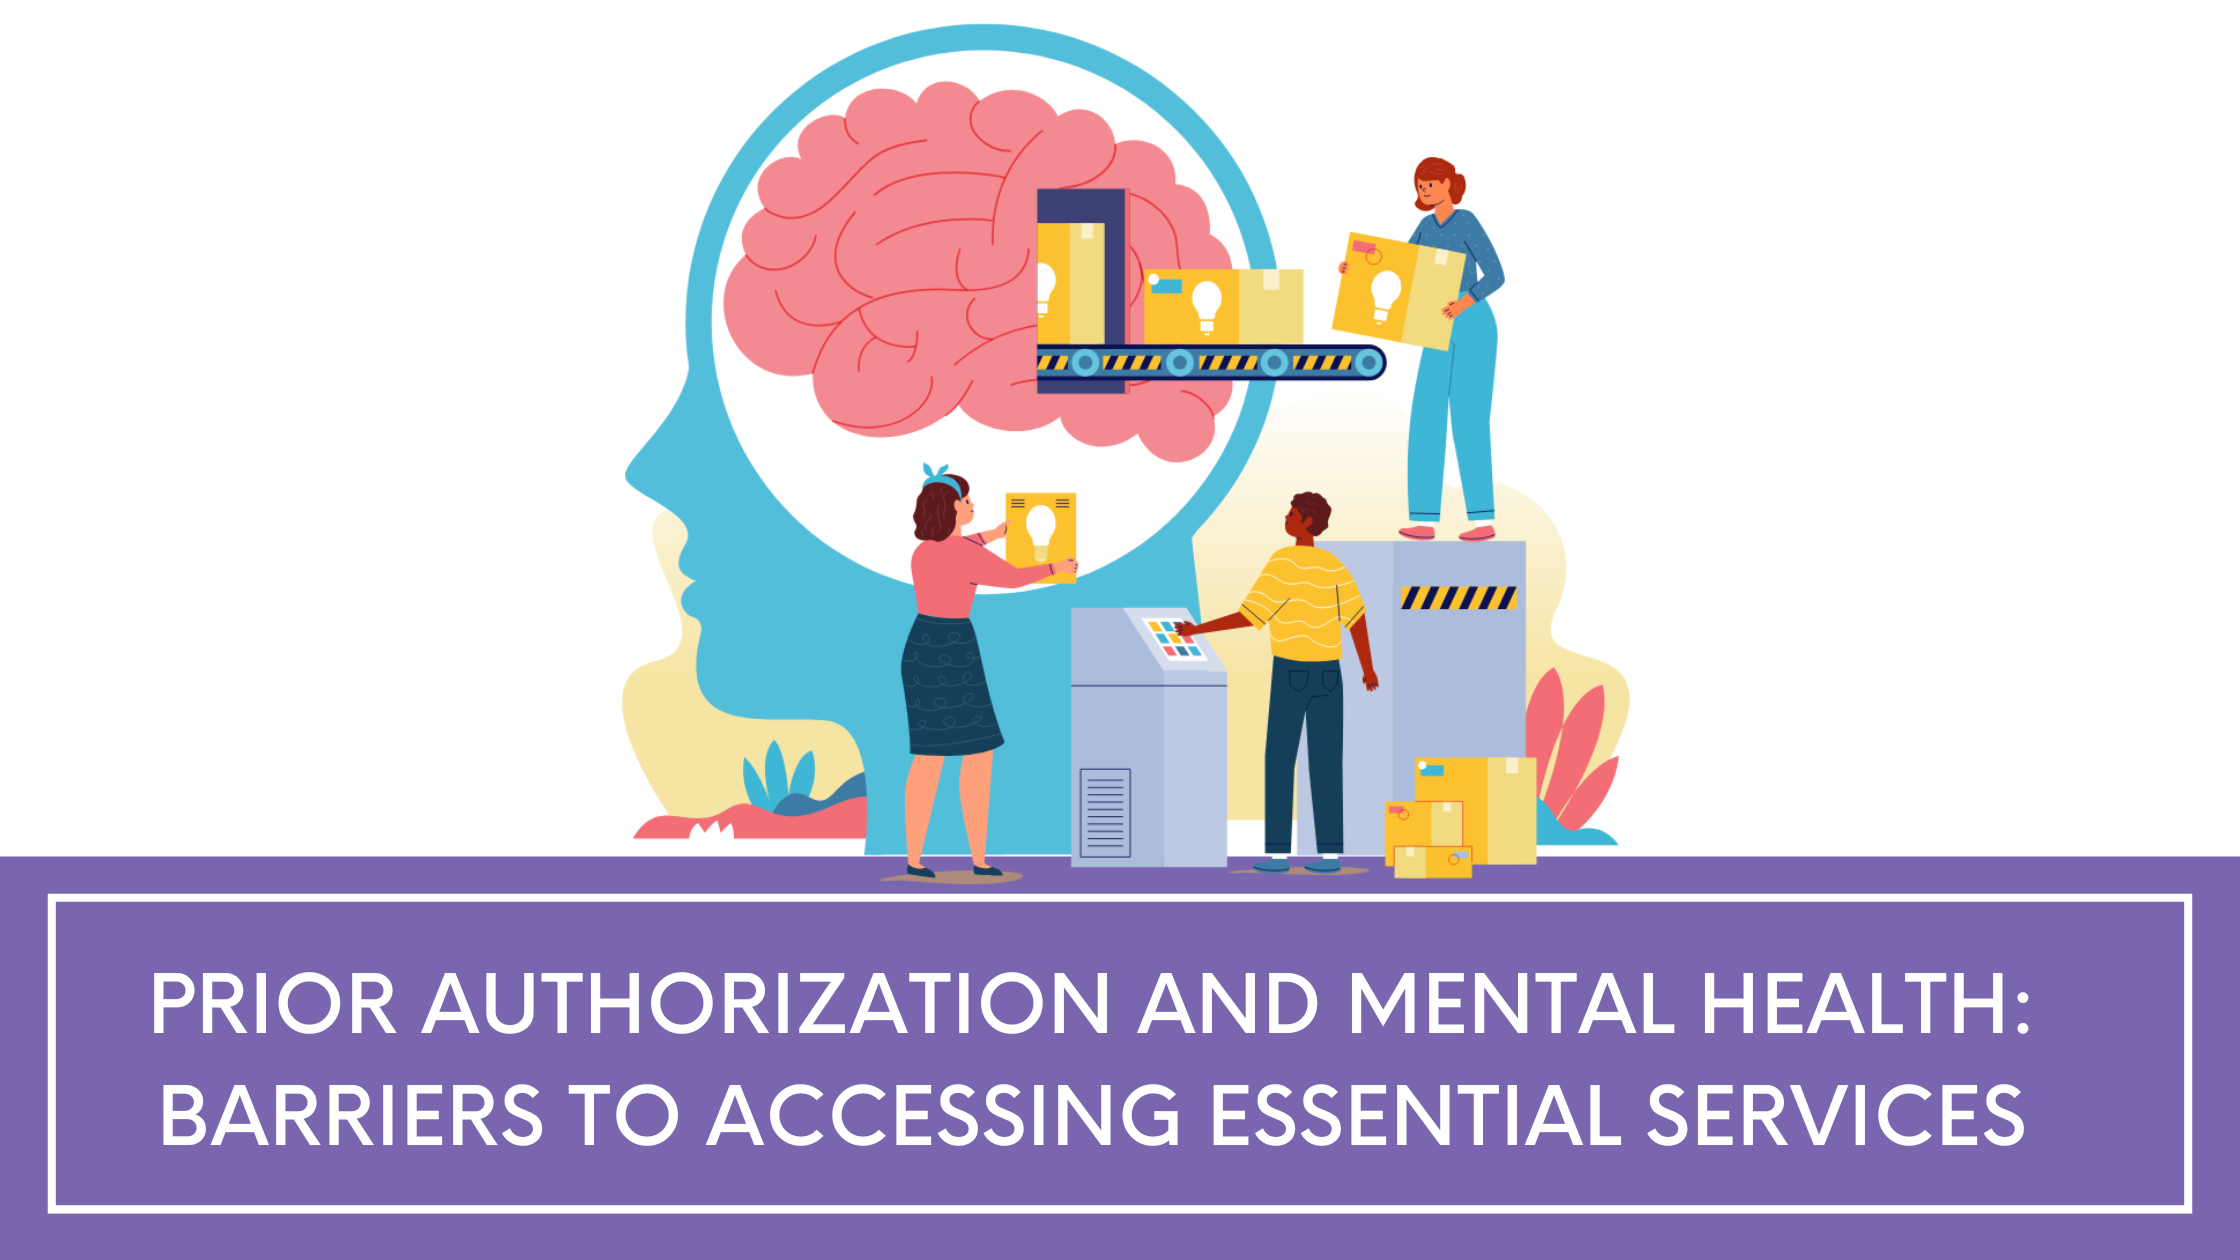 Prior Authorization and Mental Health